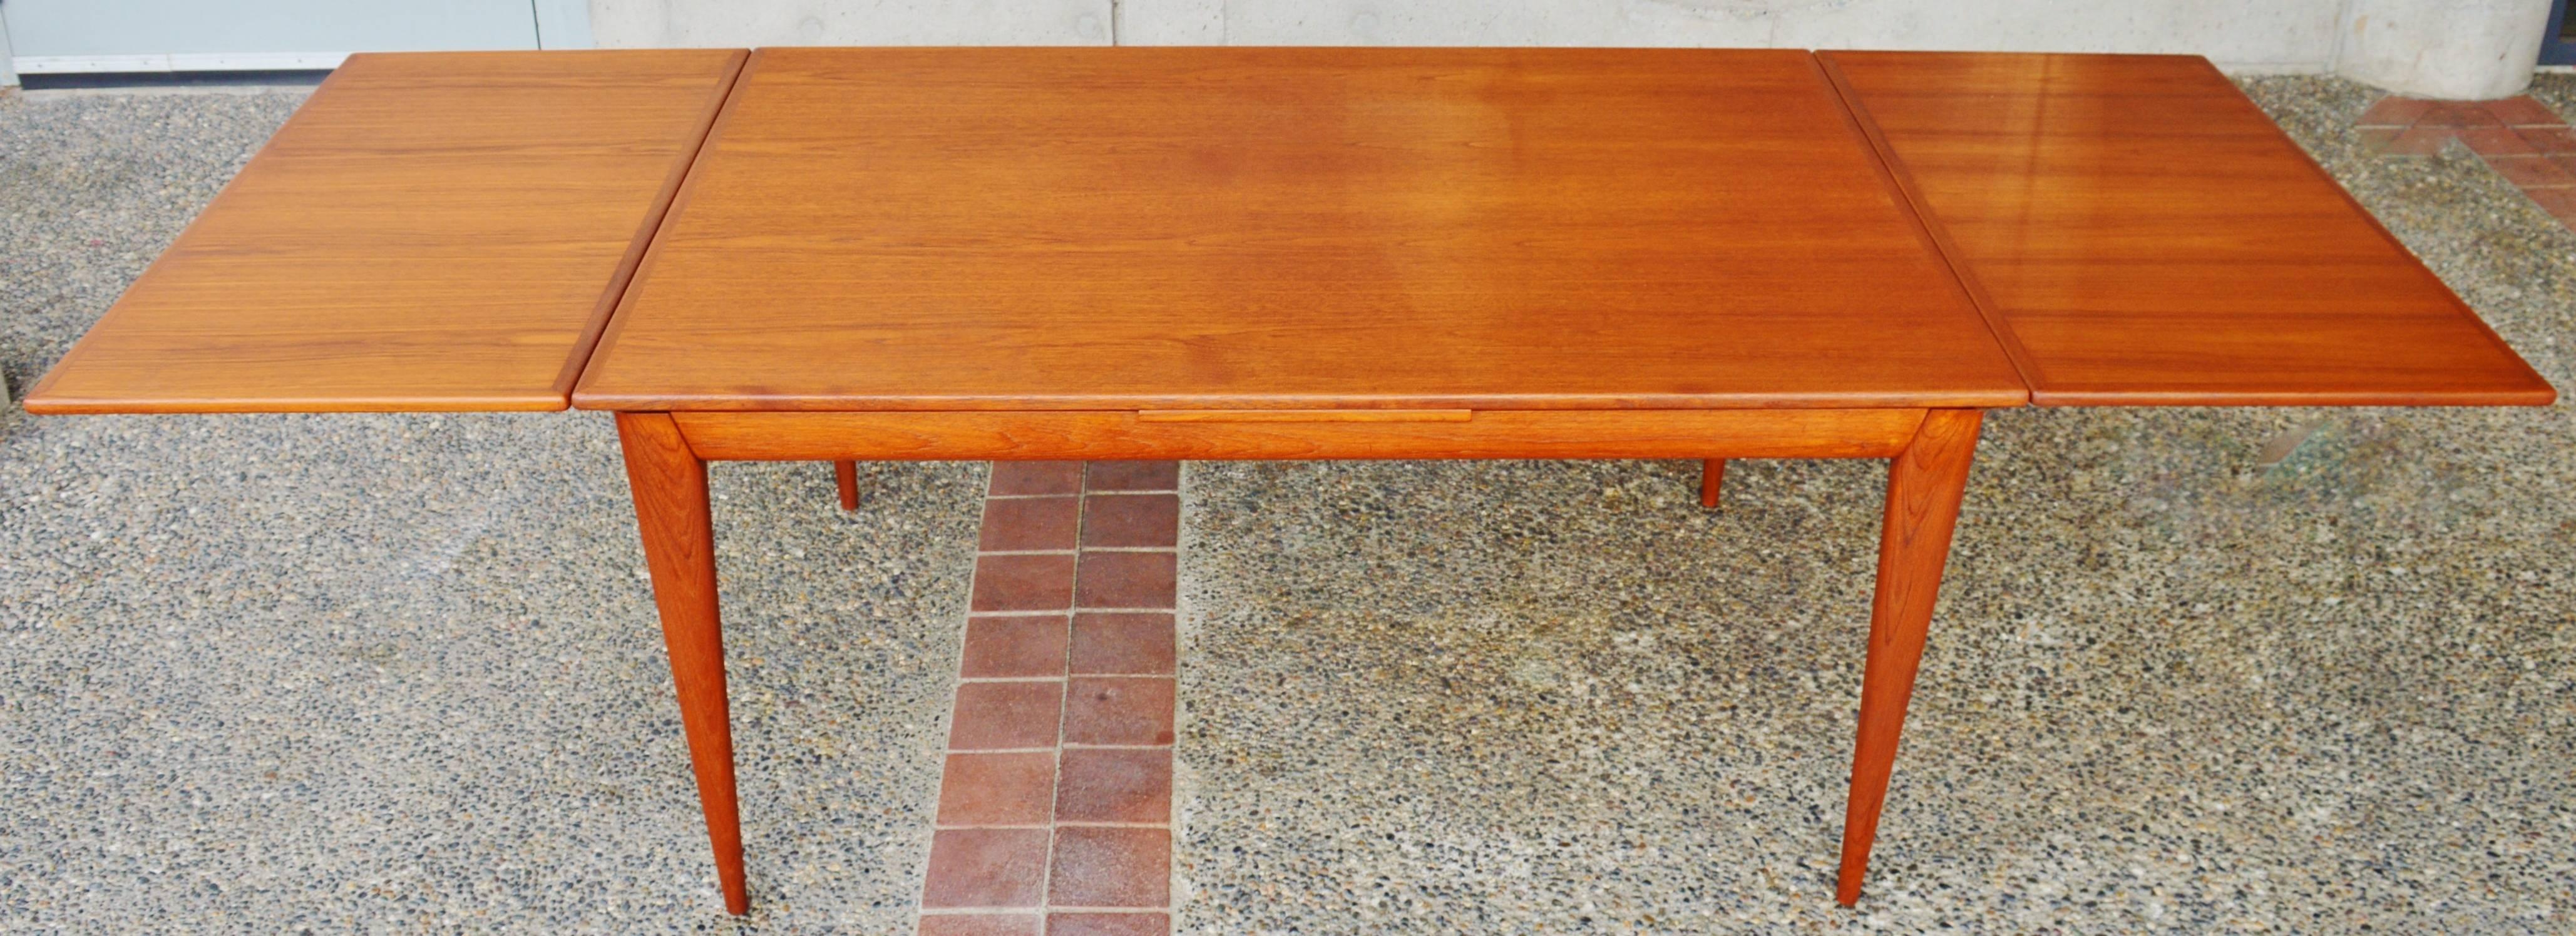 Scandinavian Modern Impeccable No Moller Rare Teak Extending Dining Table with Sexy Apron and Legs